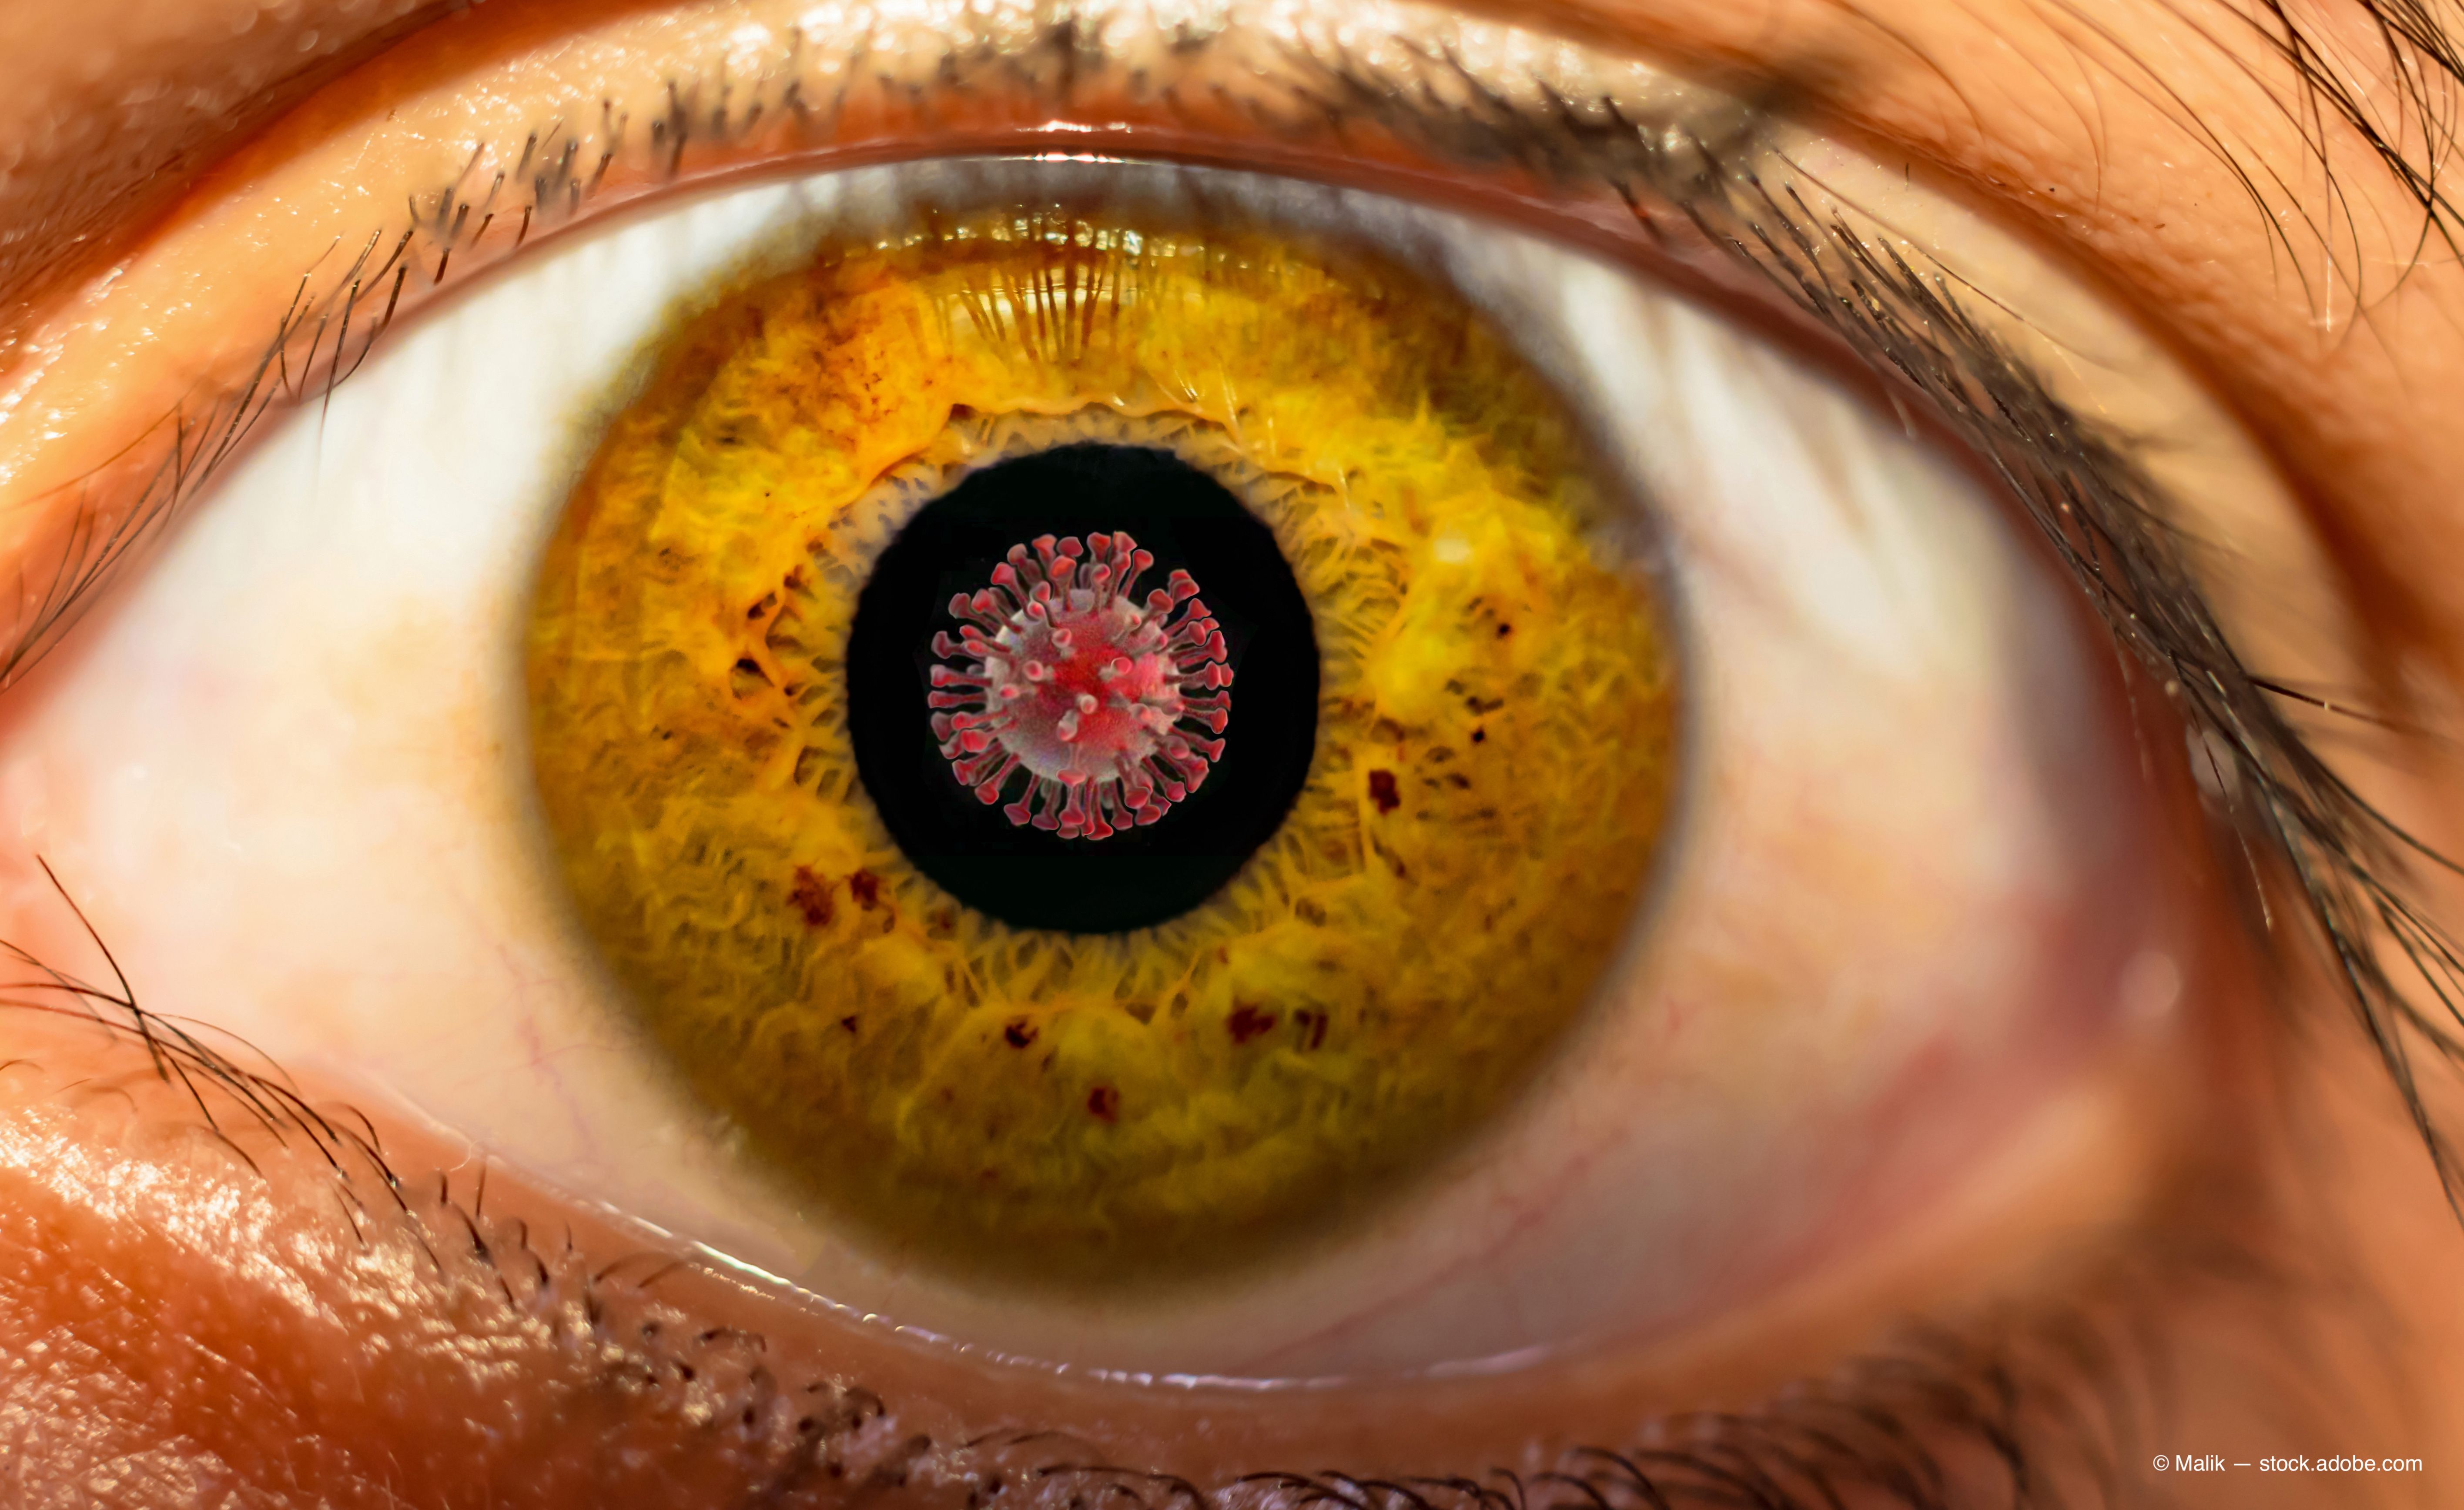  Active COVID-19 can affect the pupillary diameter, according to Turkish investigators Serap Yurttaser Ocak, MD, and colleagues, who reported finding significant differences in the pupillary diameters between when the virus was active and 3 months later